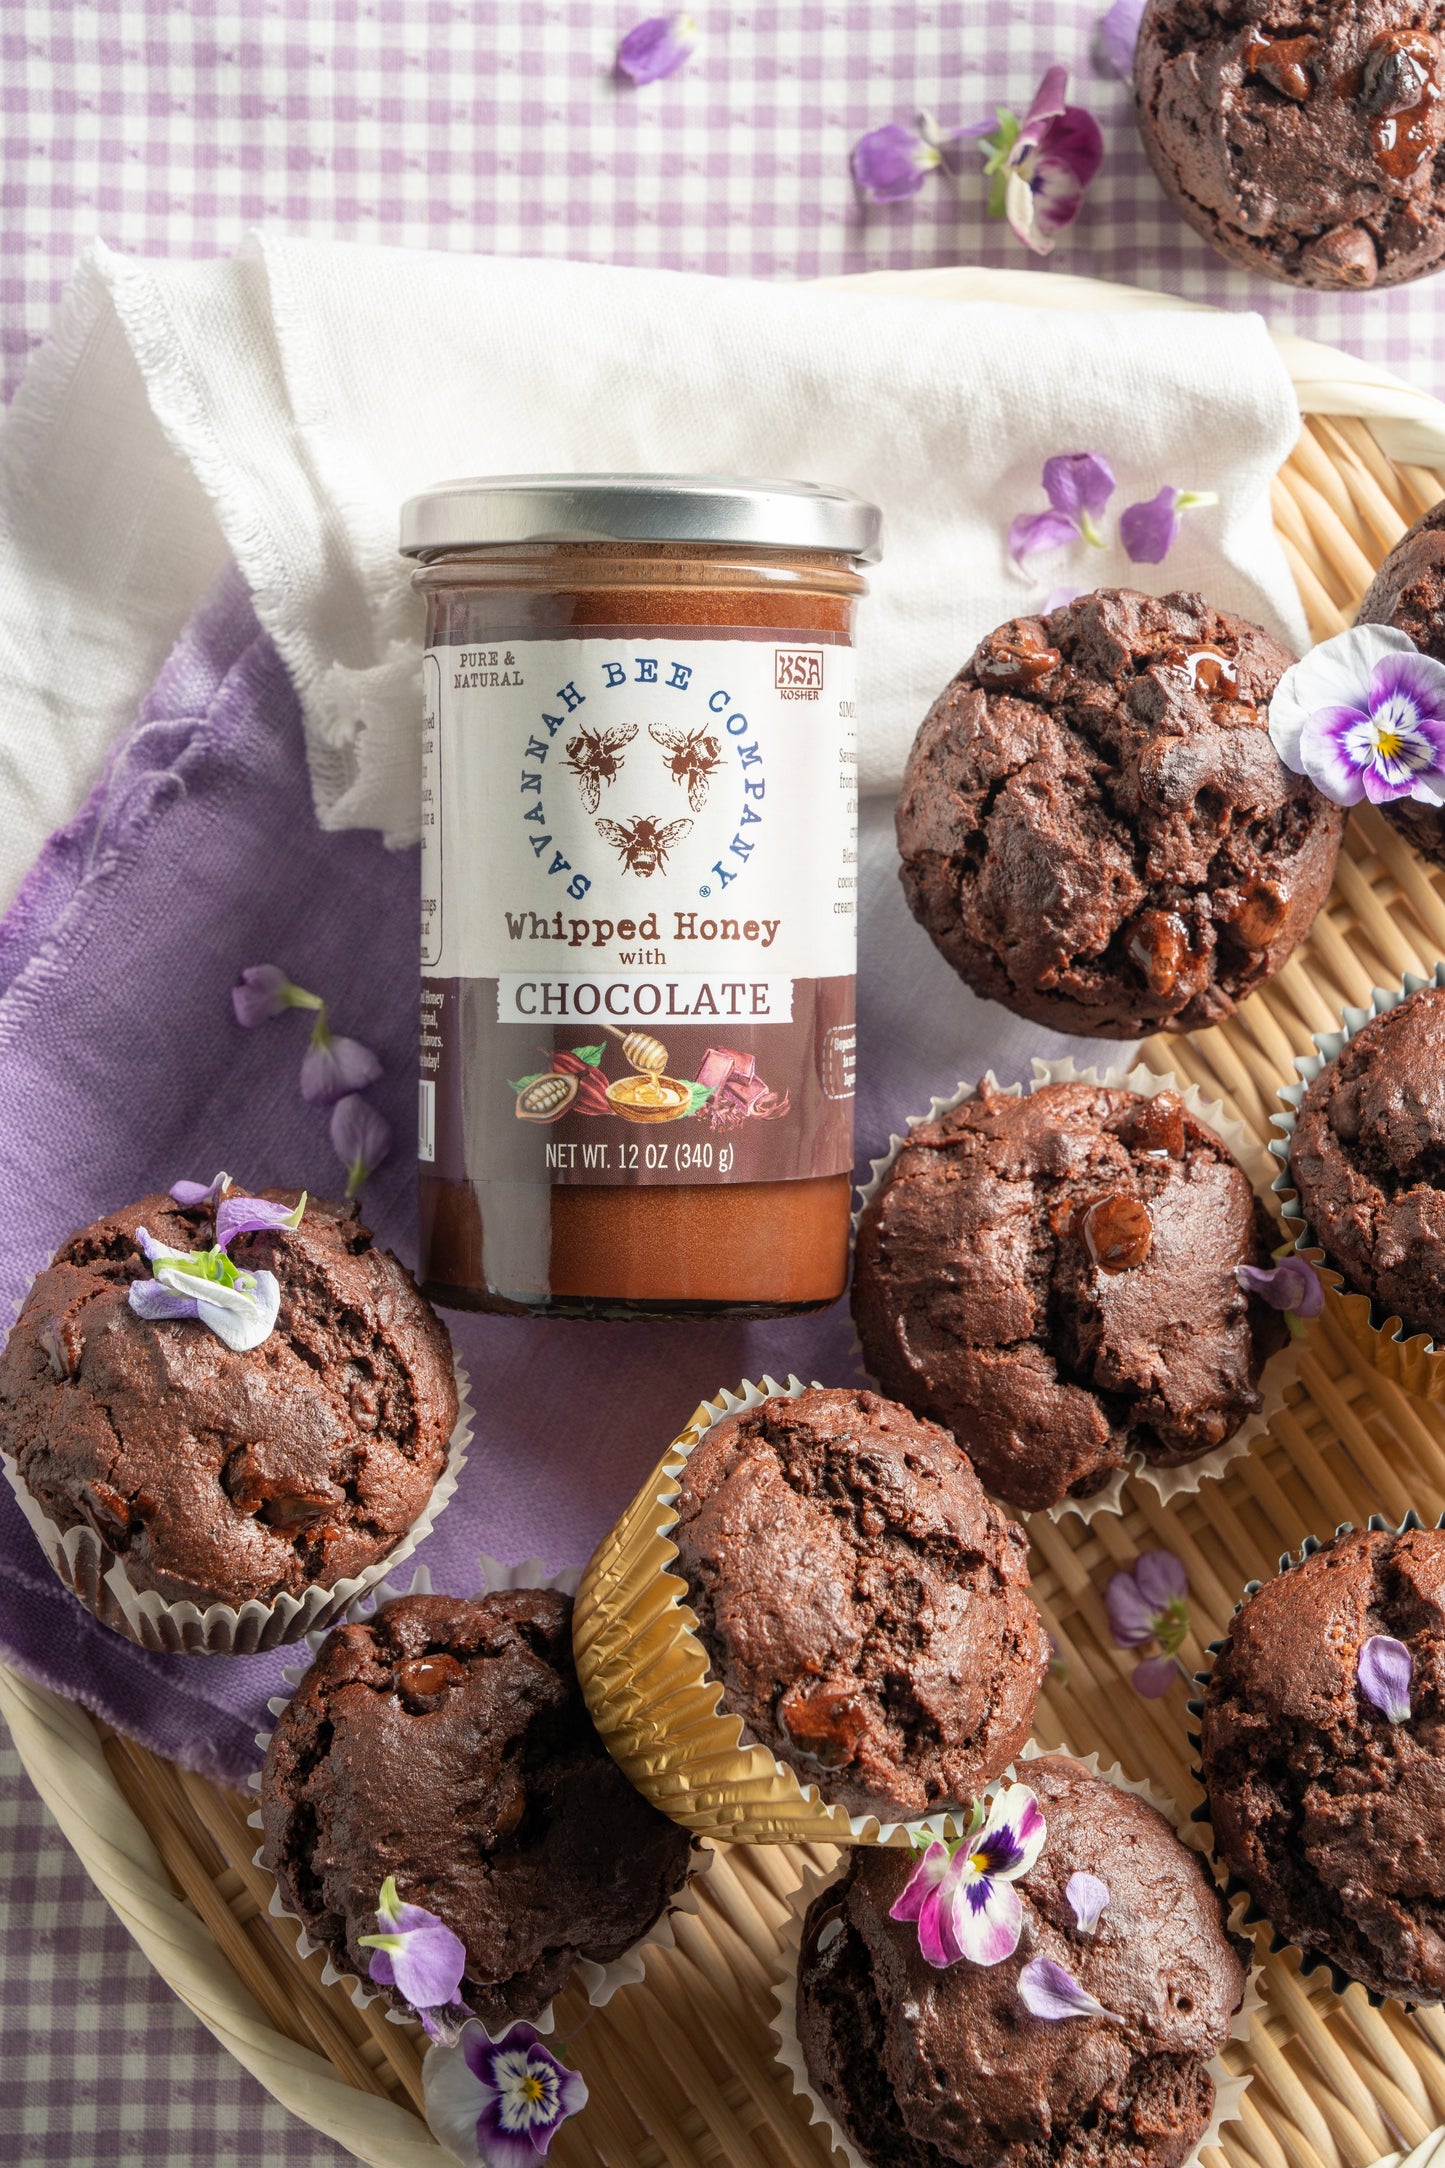 Triple chocolate muffins in a basket with a purple napkin next to a 12 ounce whipped honey with chocolate jar.